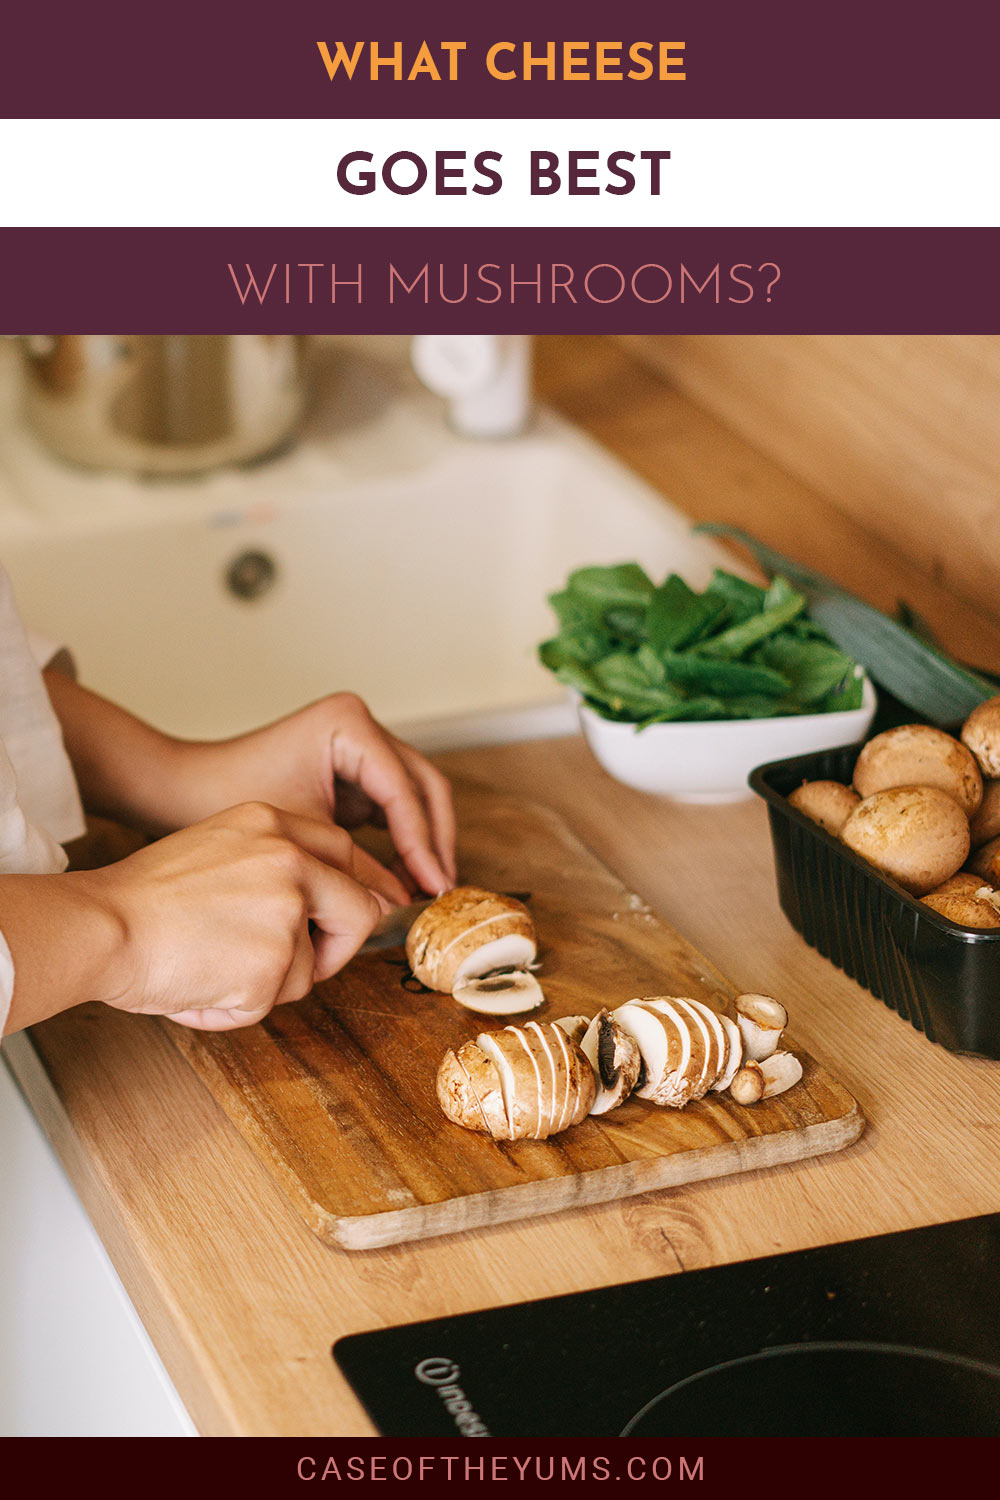 A chef cutting mushrooms on a chopping board - What Cheese Goes Best With Mushrooms?